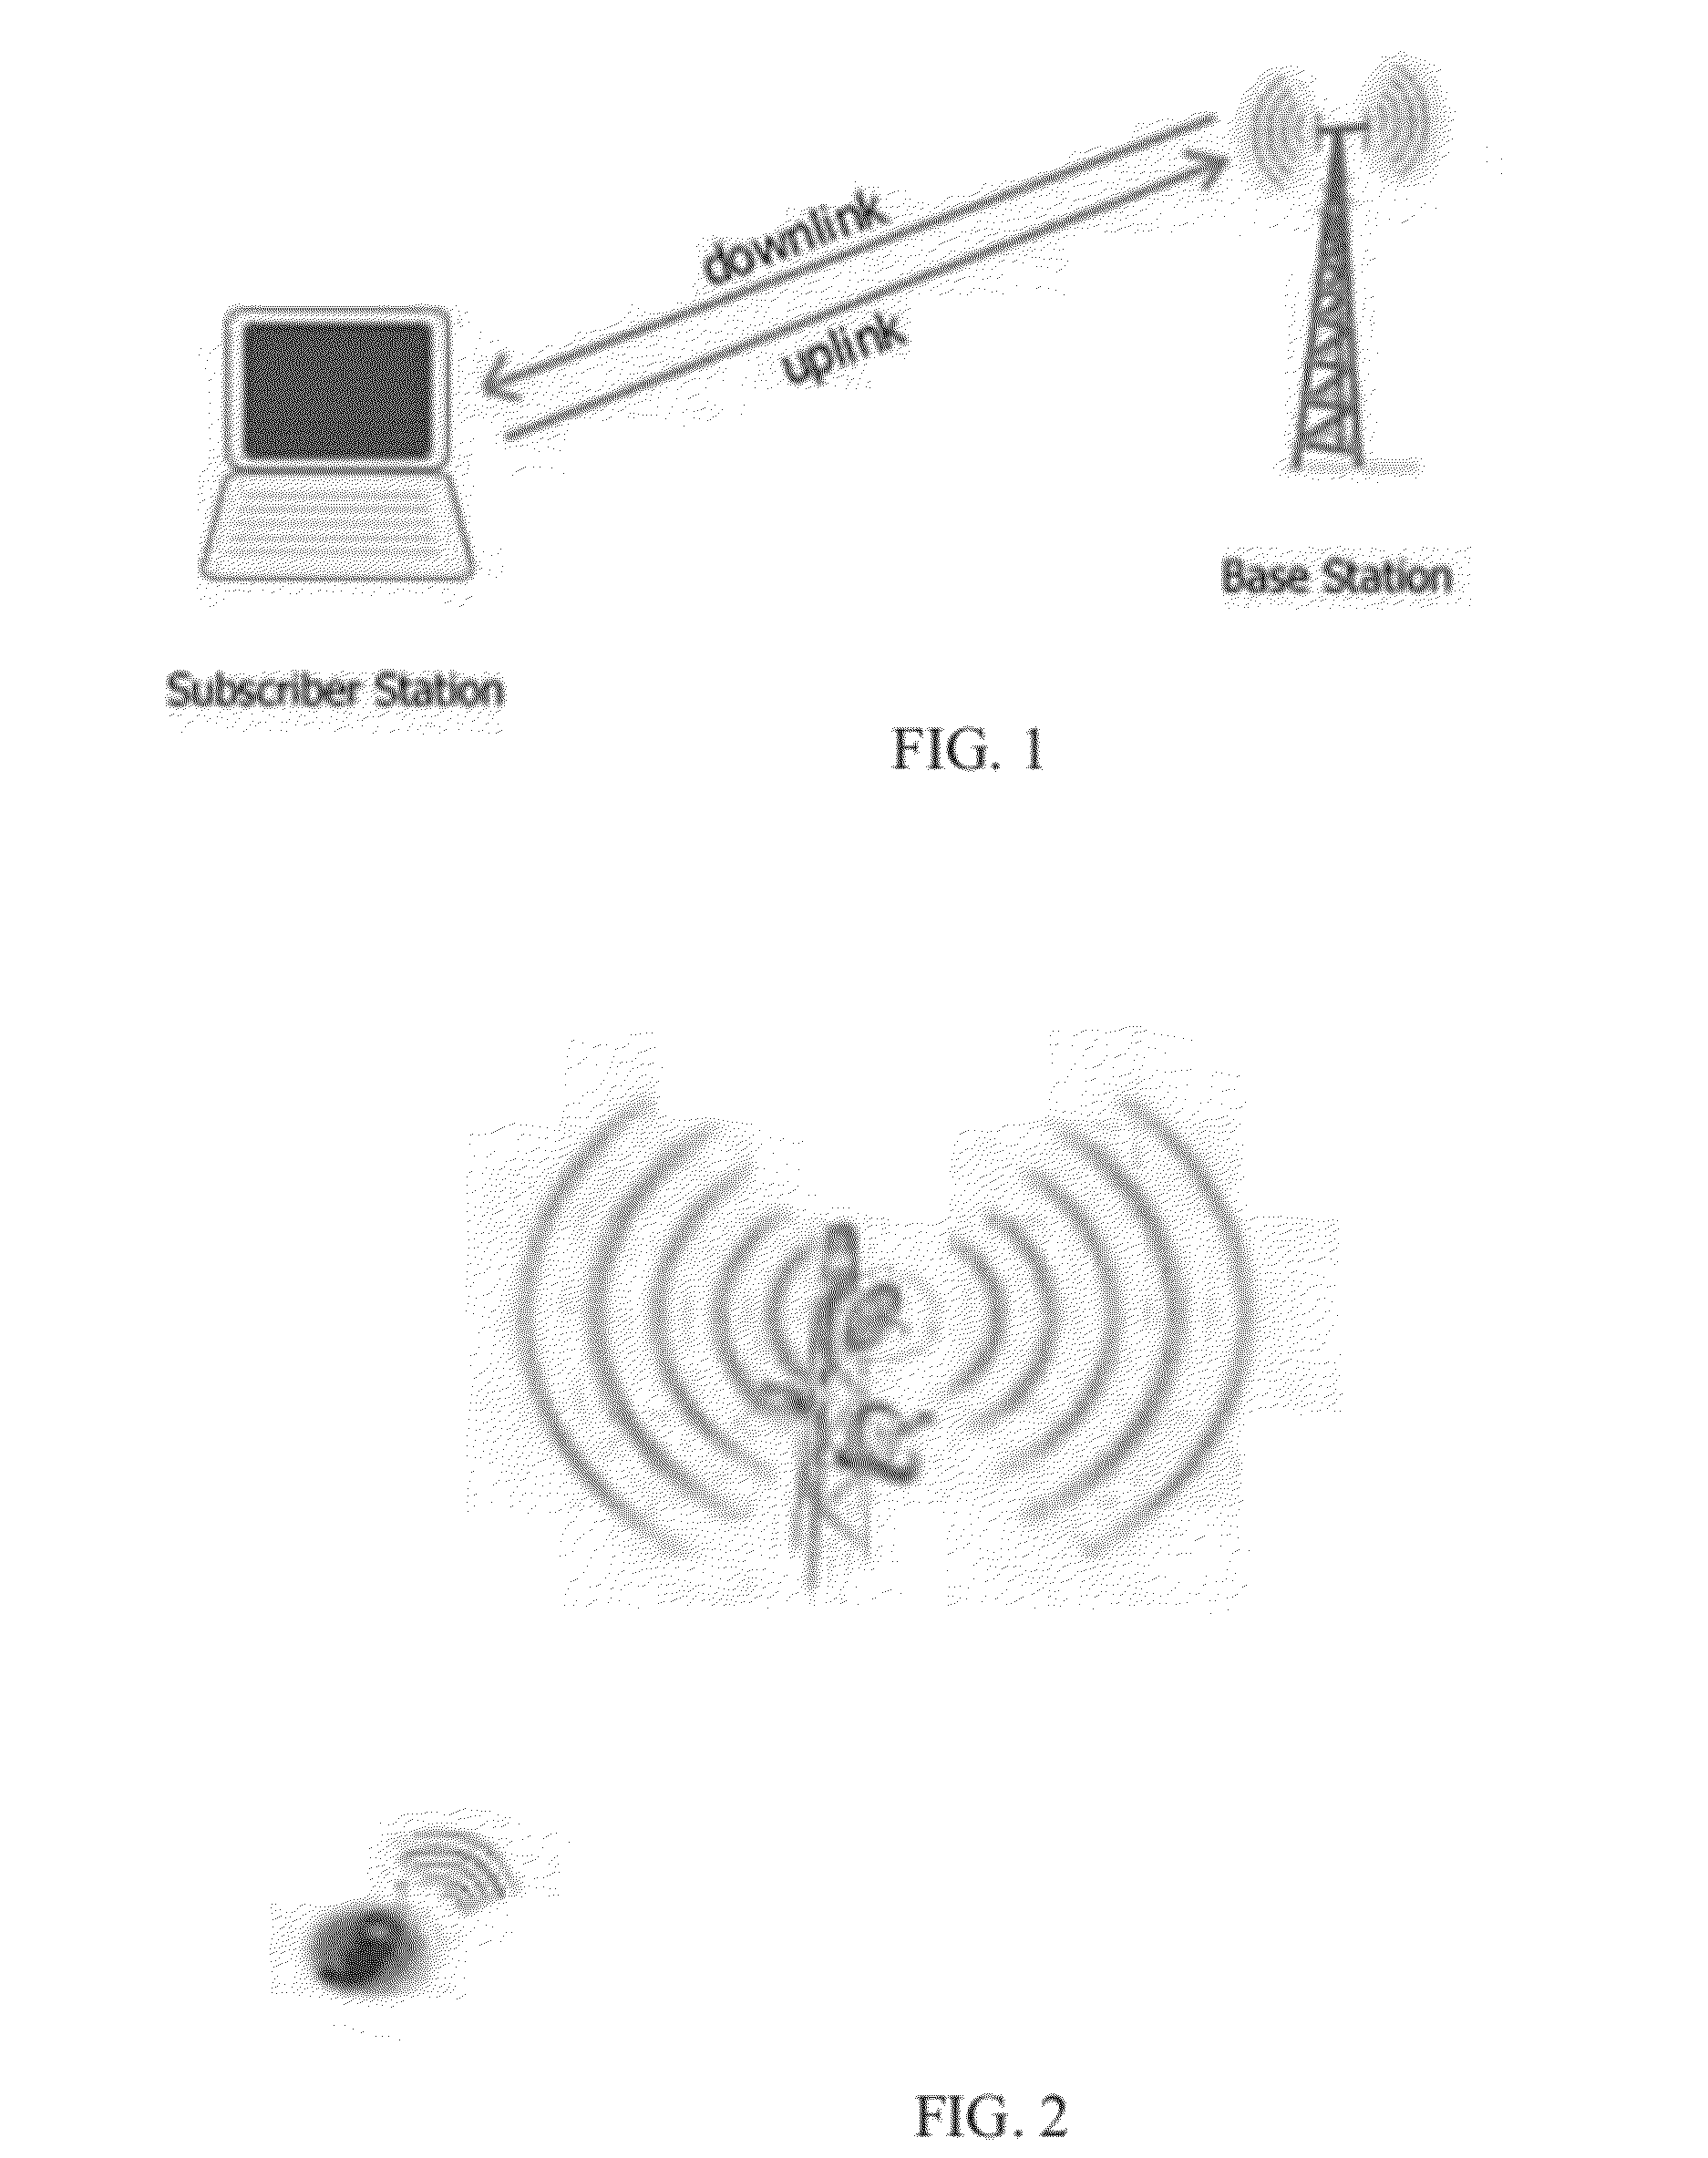 Method For A canceling Self Interference Signal Using Passive Noise Cancellation For Full-Duplex Simultaneous (in Time) and Overlapping (In Space) Wireless transmission and Reception On The Same Frequency Band